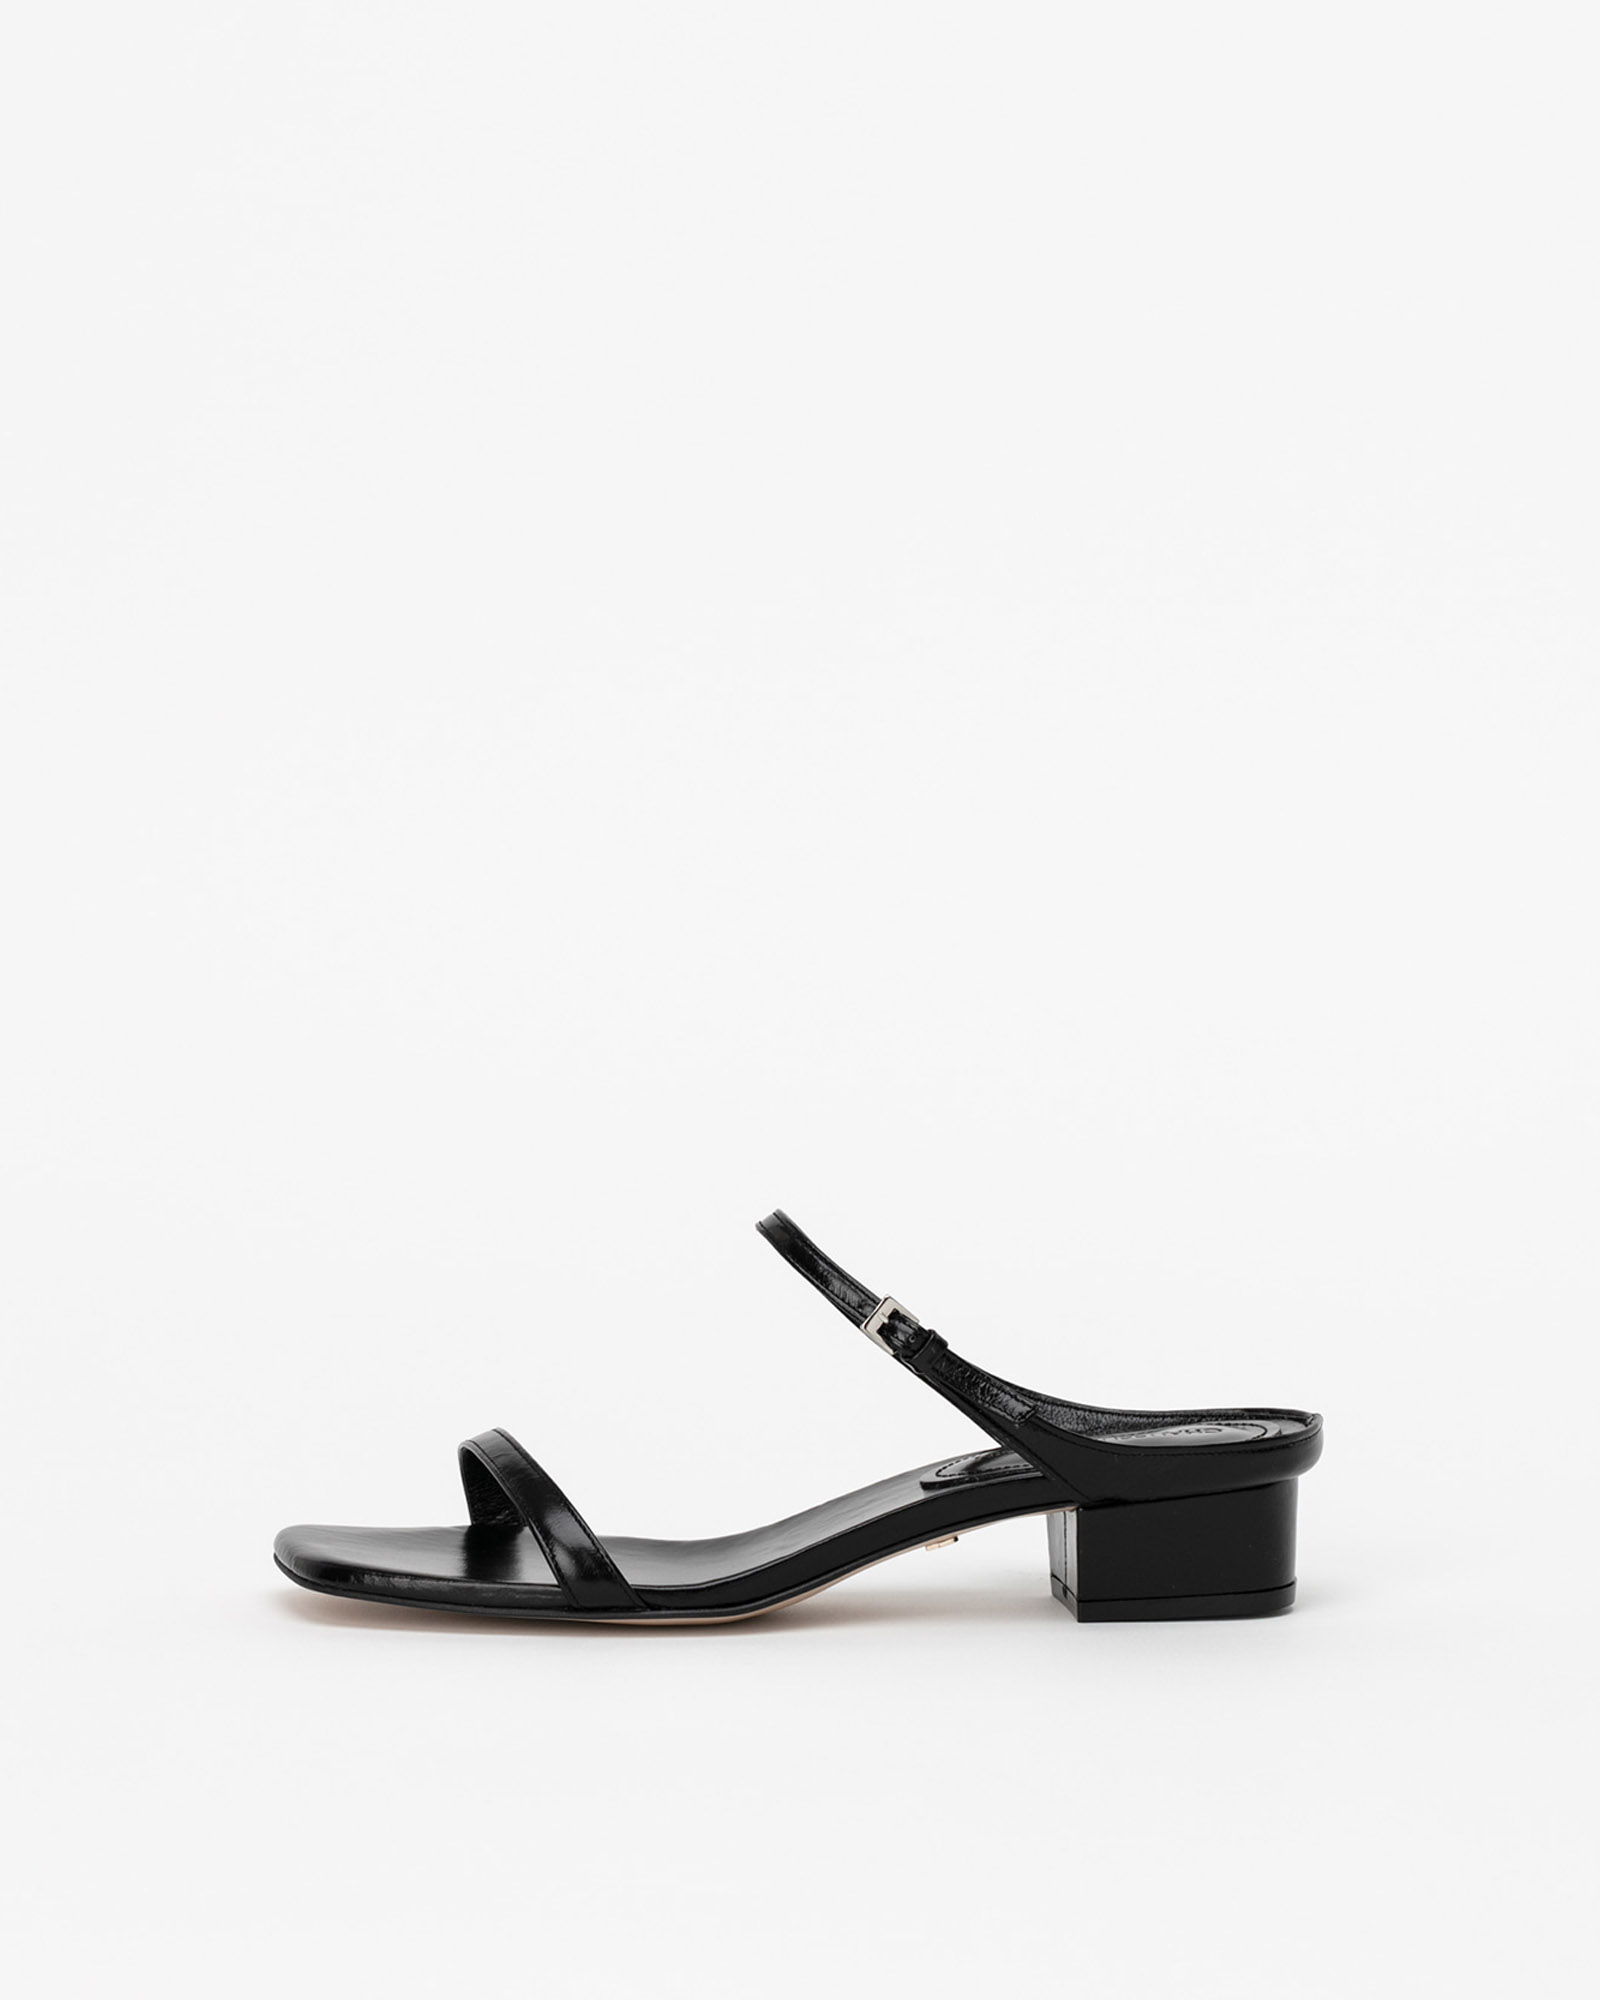 Sequire Buckled Strap Wrinkled Sandals